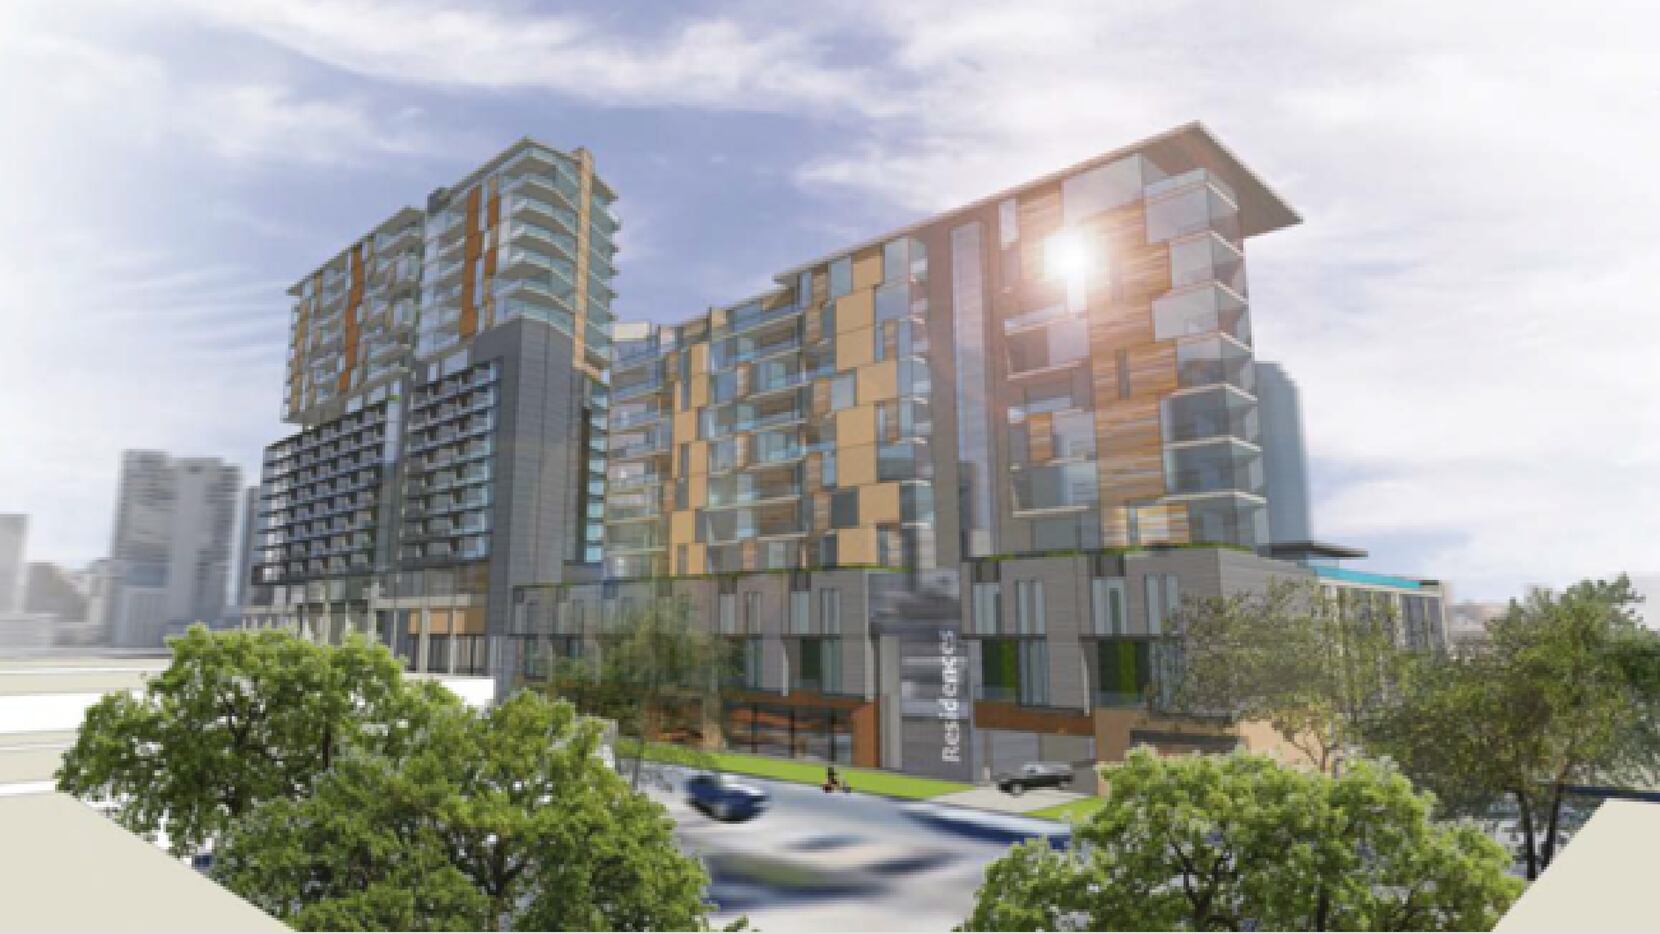 JMJ Development's Design District project would include hotel rooms, condos and apartments...